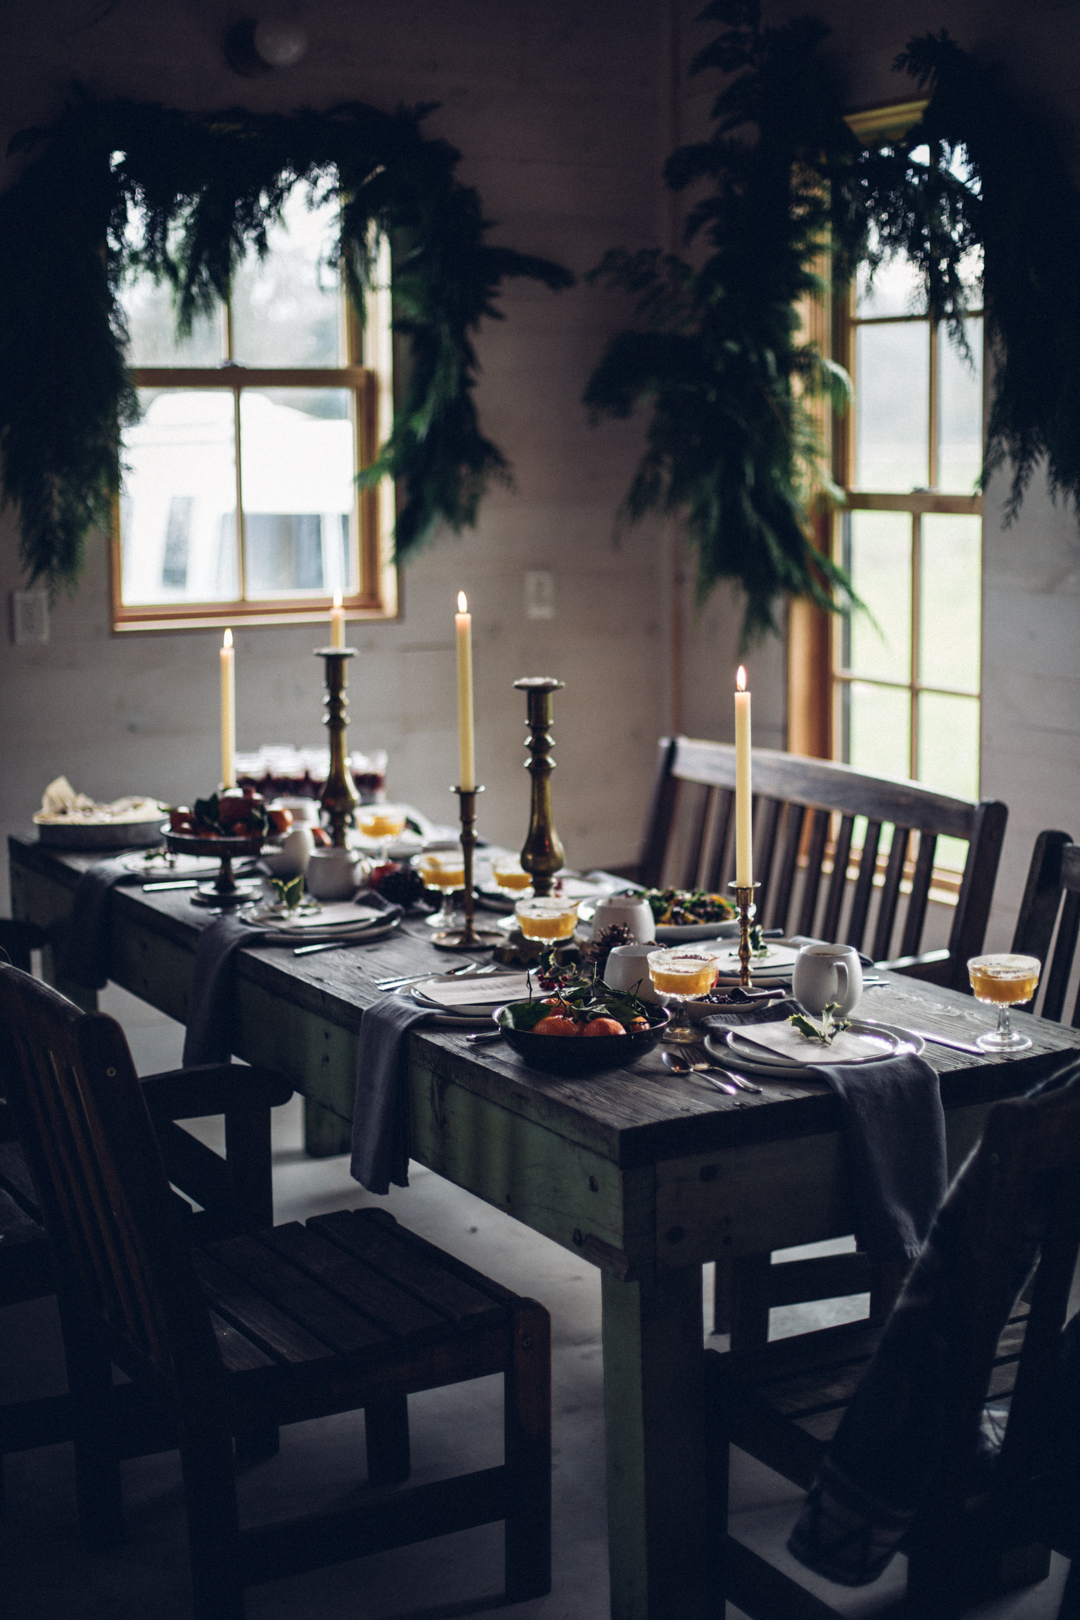 recipe-photography-styling-by-christiannkoepke-com-18